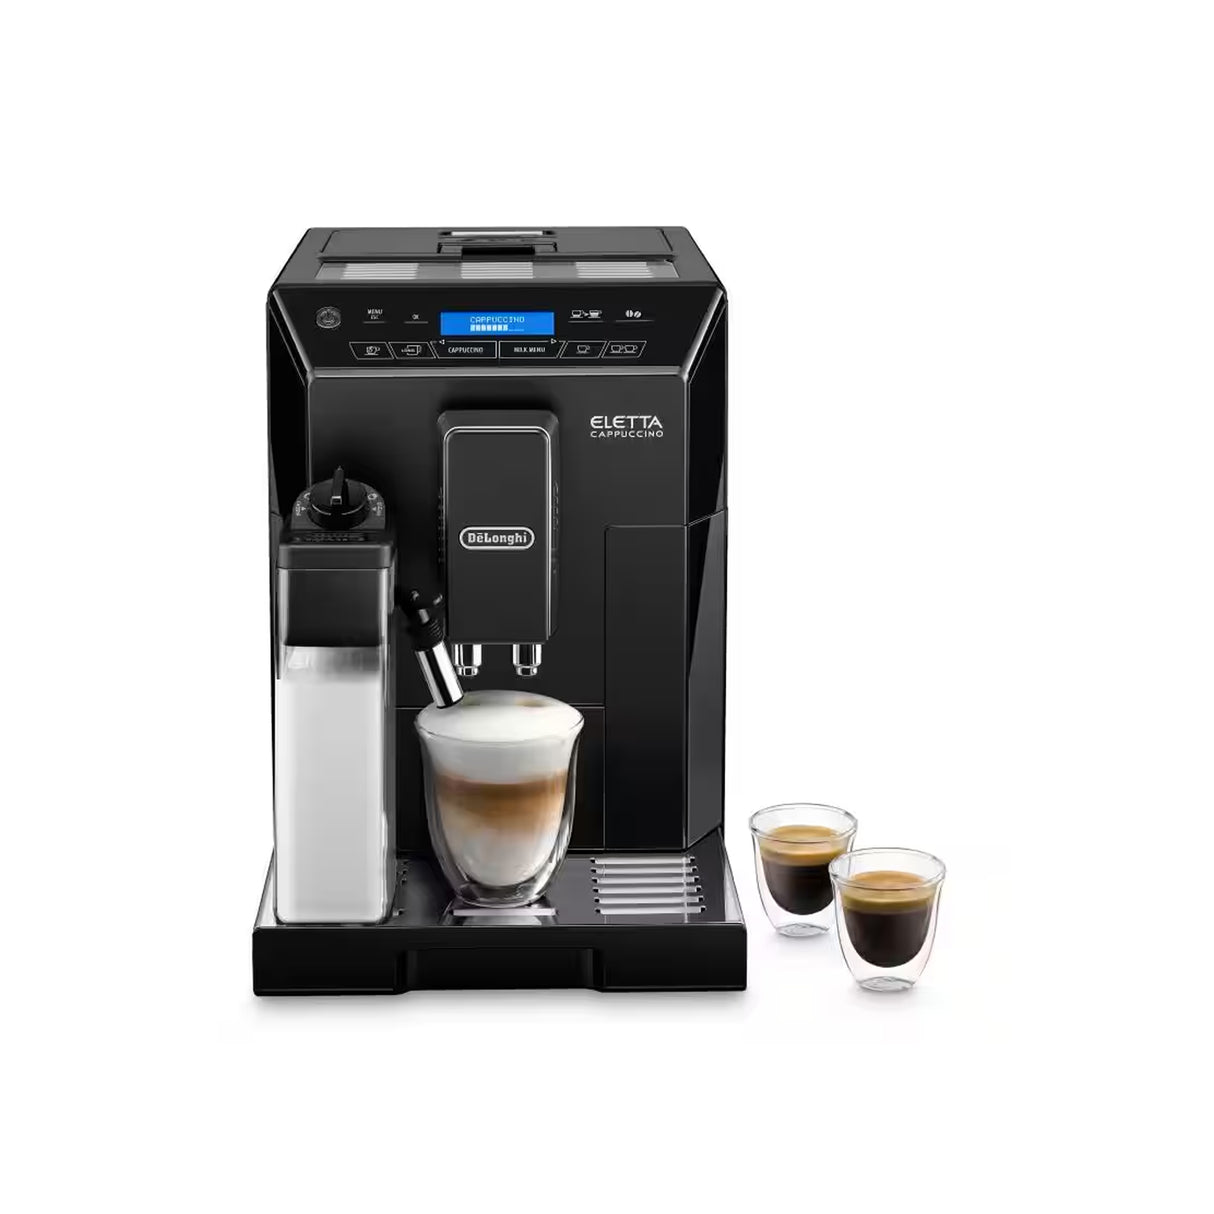 Delonghi ECAM44.660.B - Fully Automatic Coffee Maker with Lattecrema System, Thermoblock Technology, 13 Grinder Settings (Black)